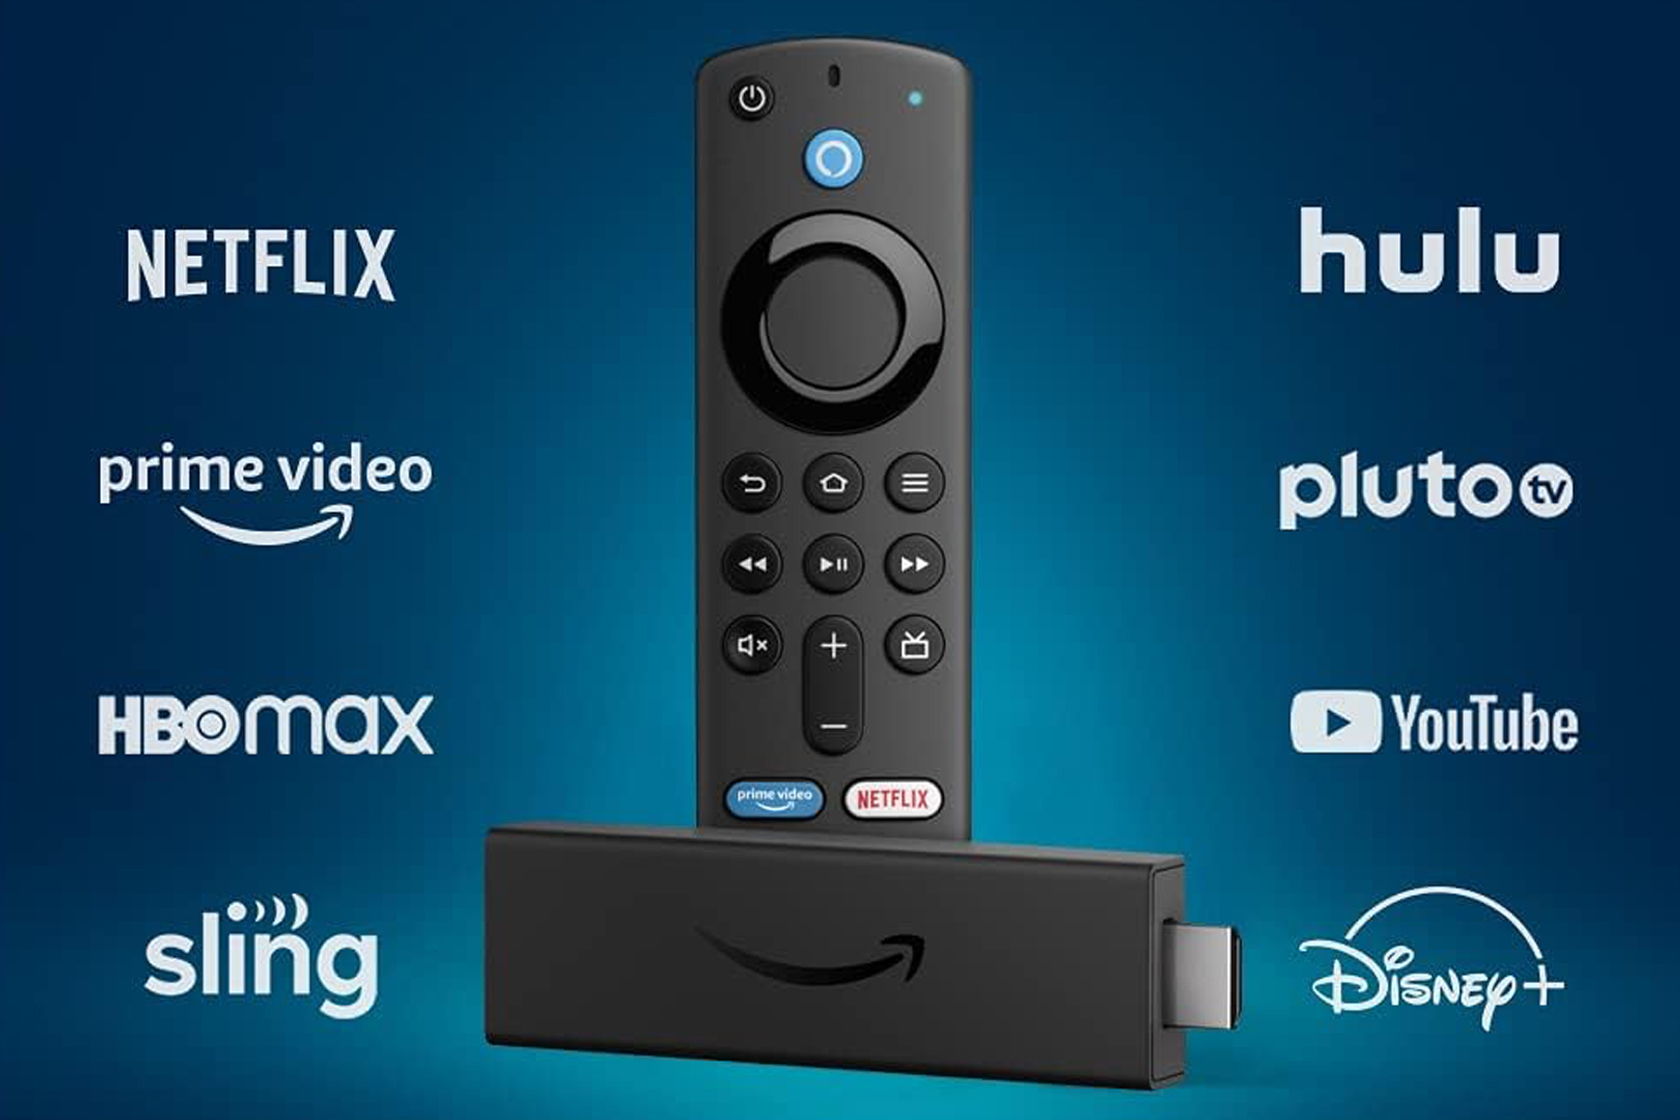 Fire TV Stick 4K price drops to $25 in this special sale